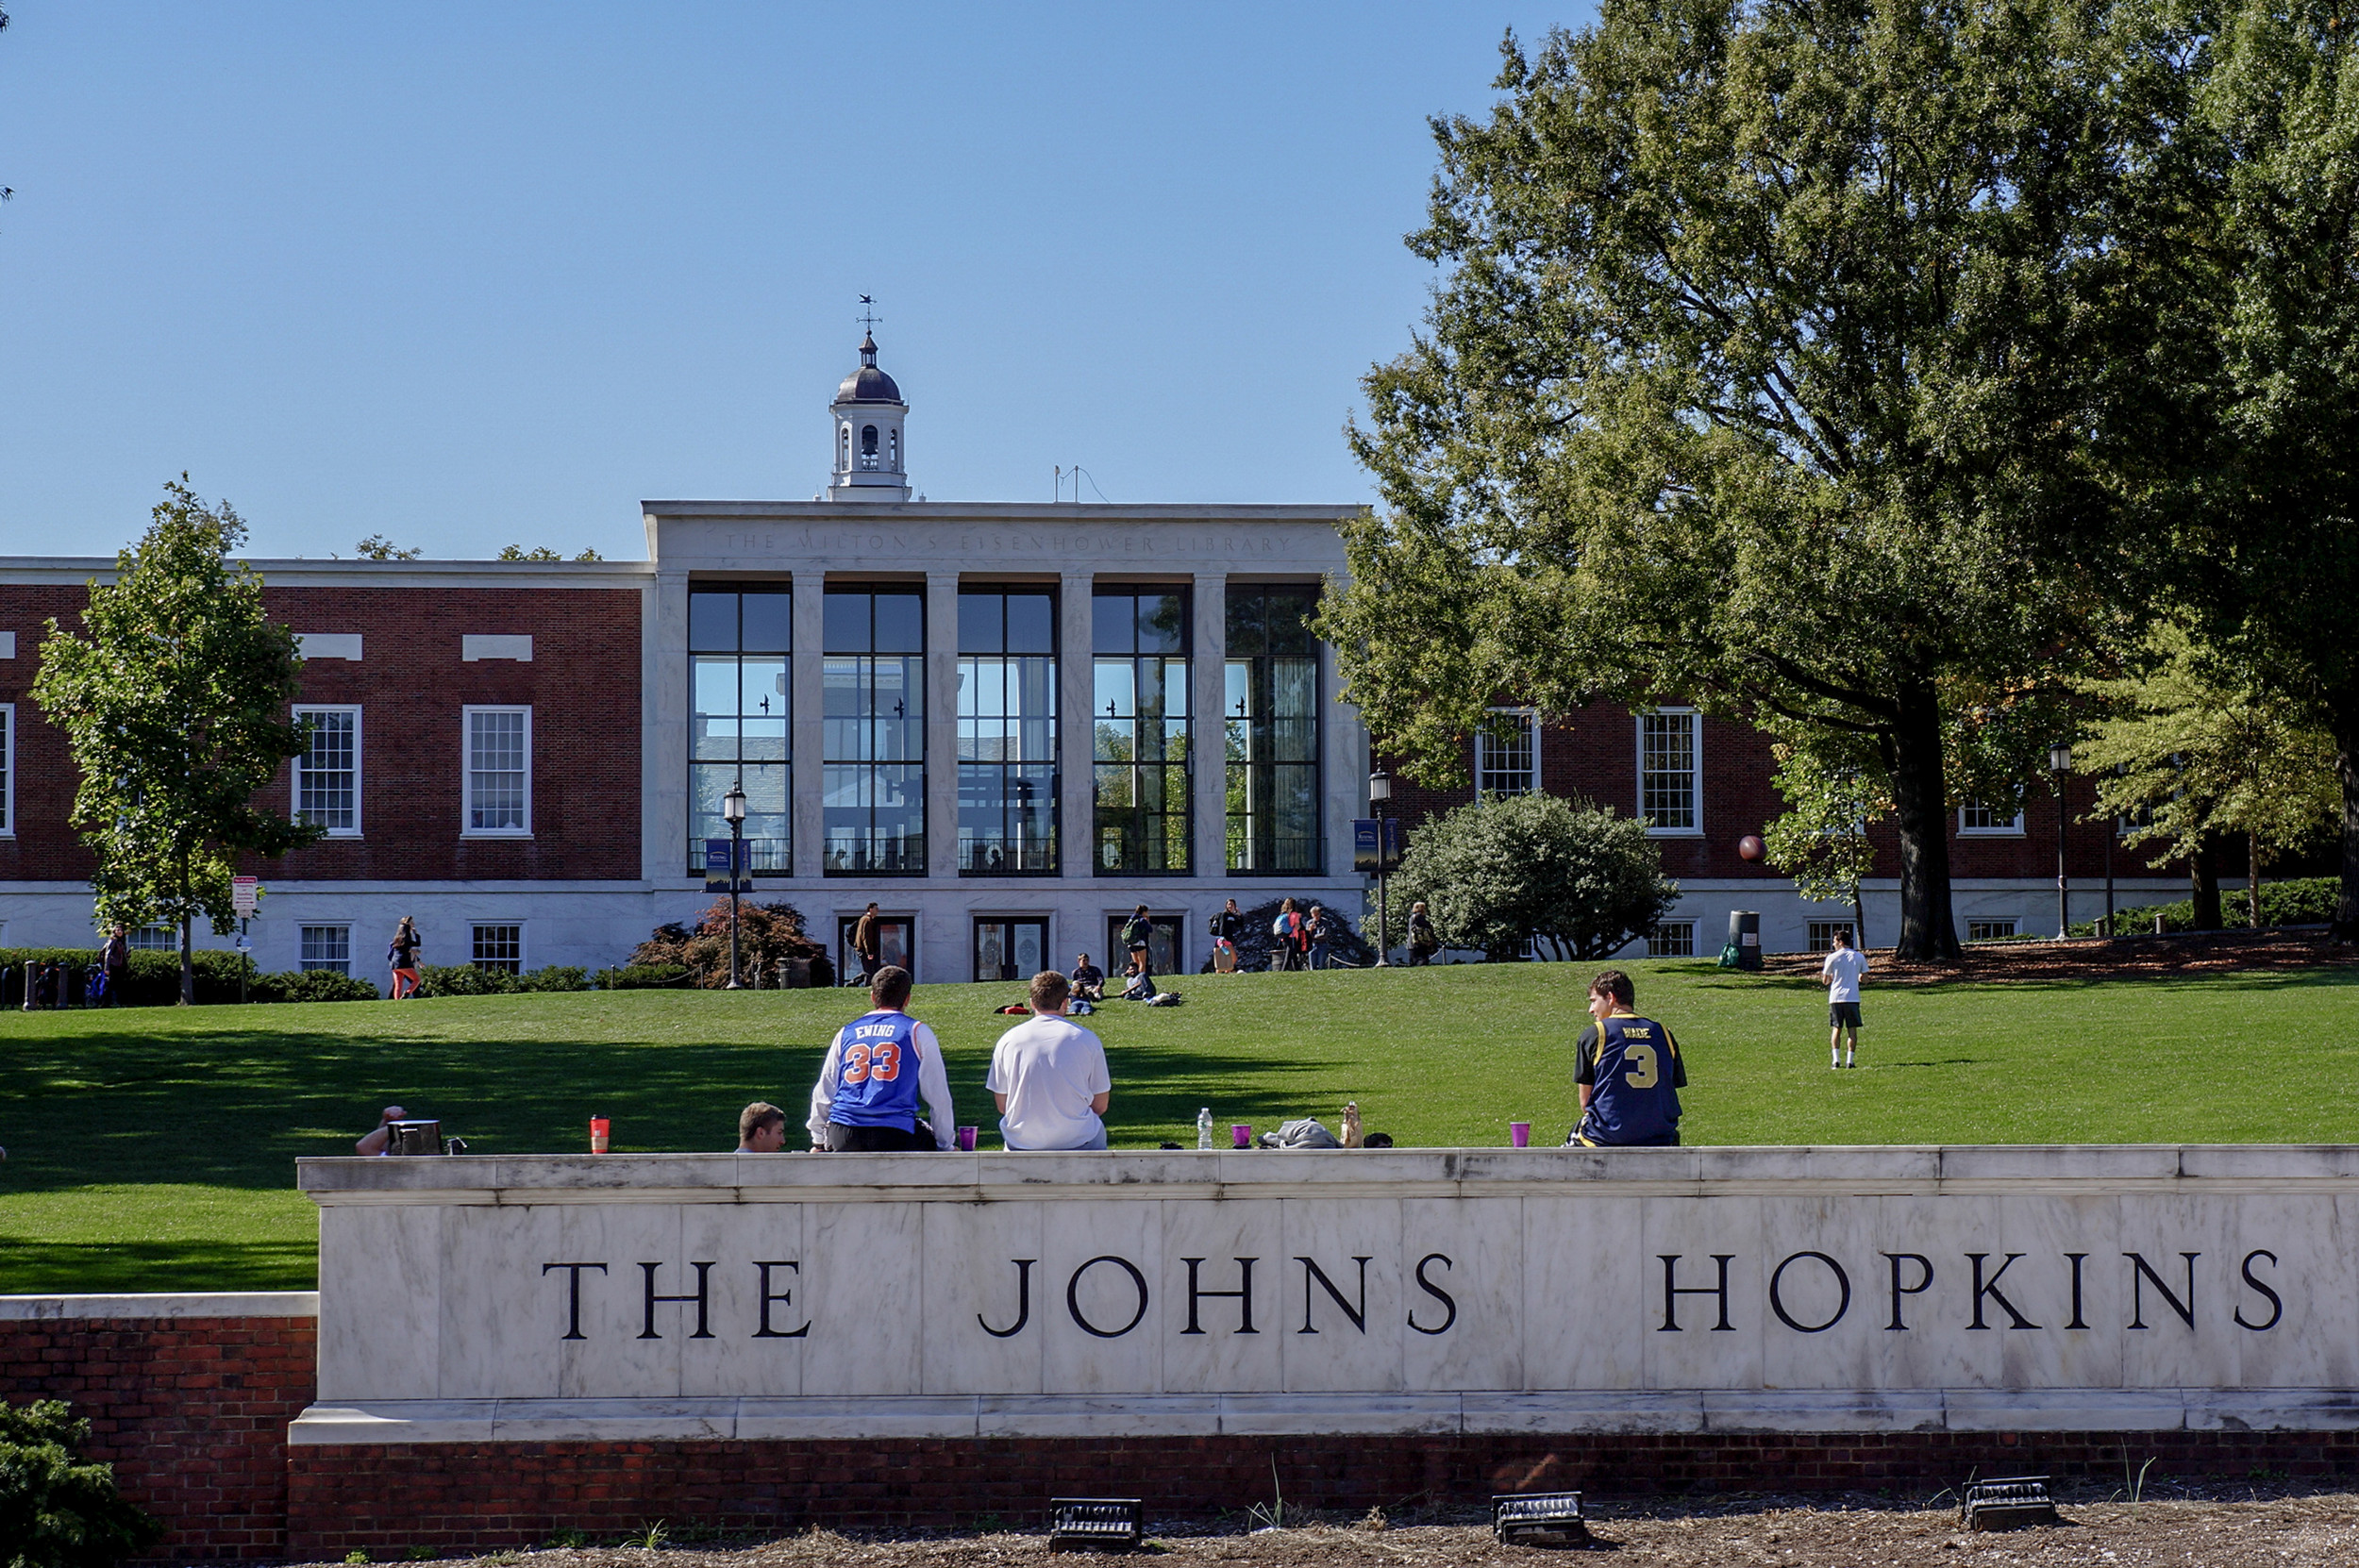 Jewish Rights Groups: Johns Hopkins University 'Must Do More